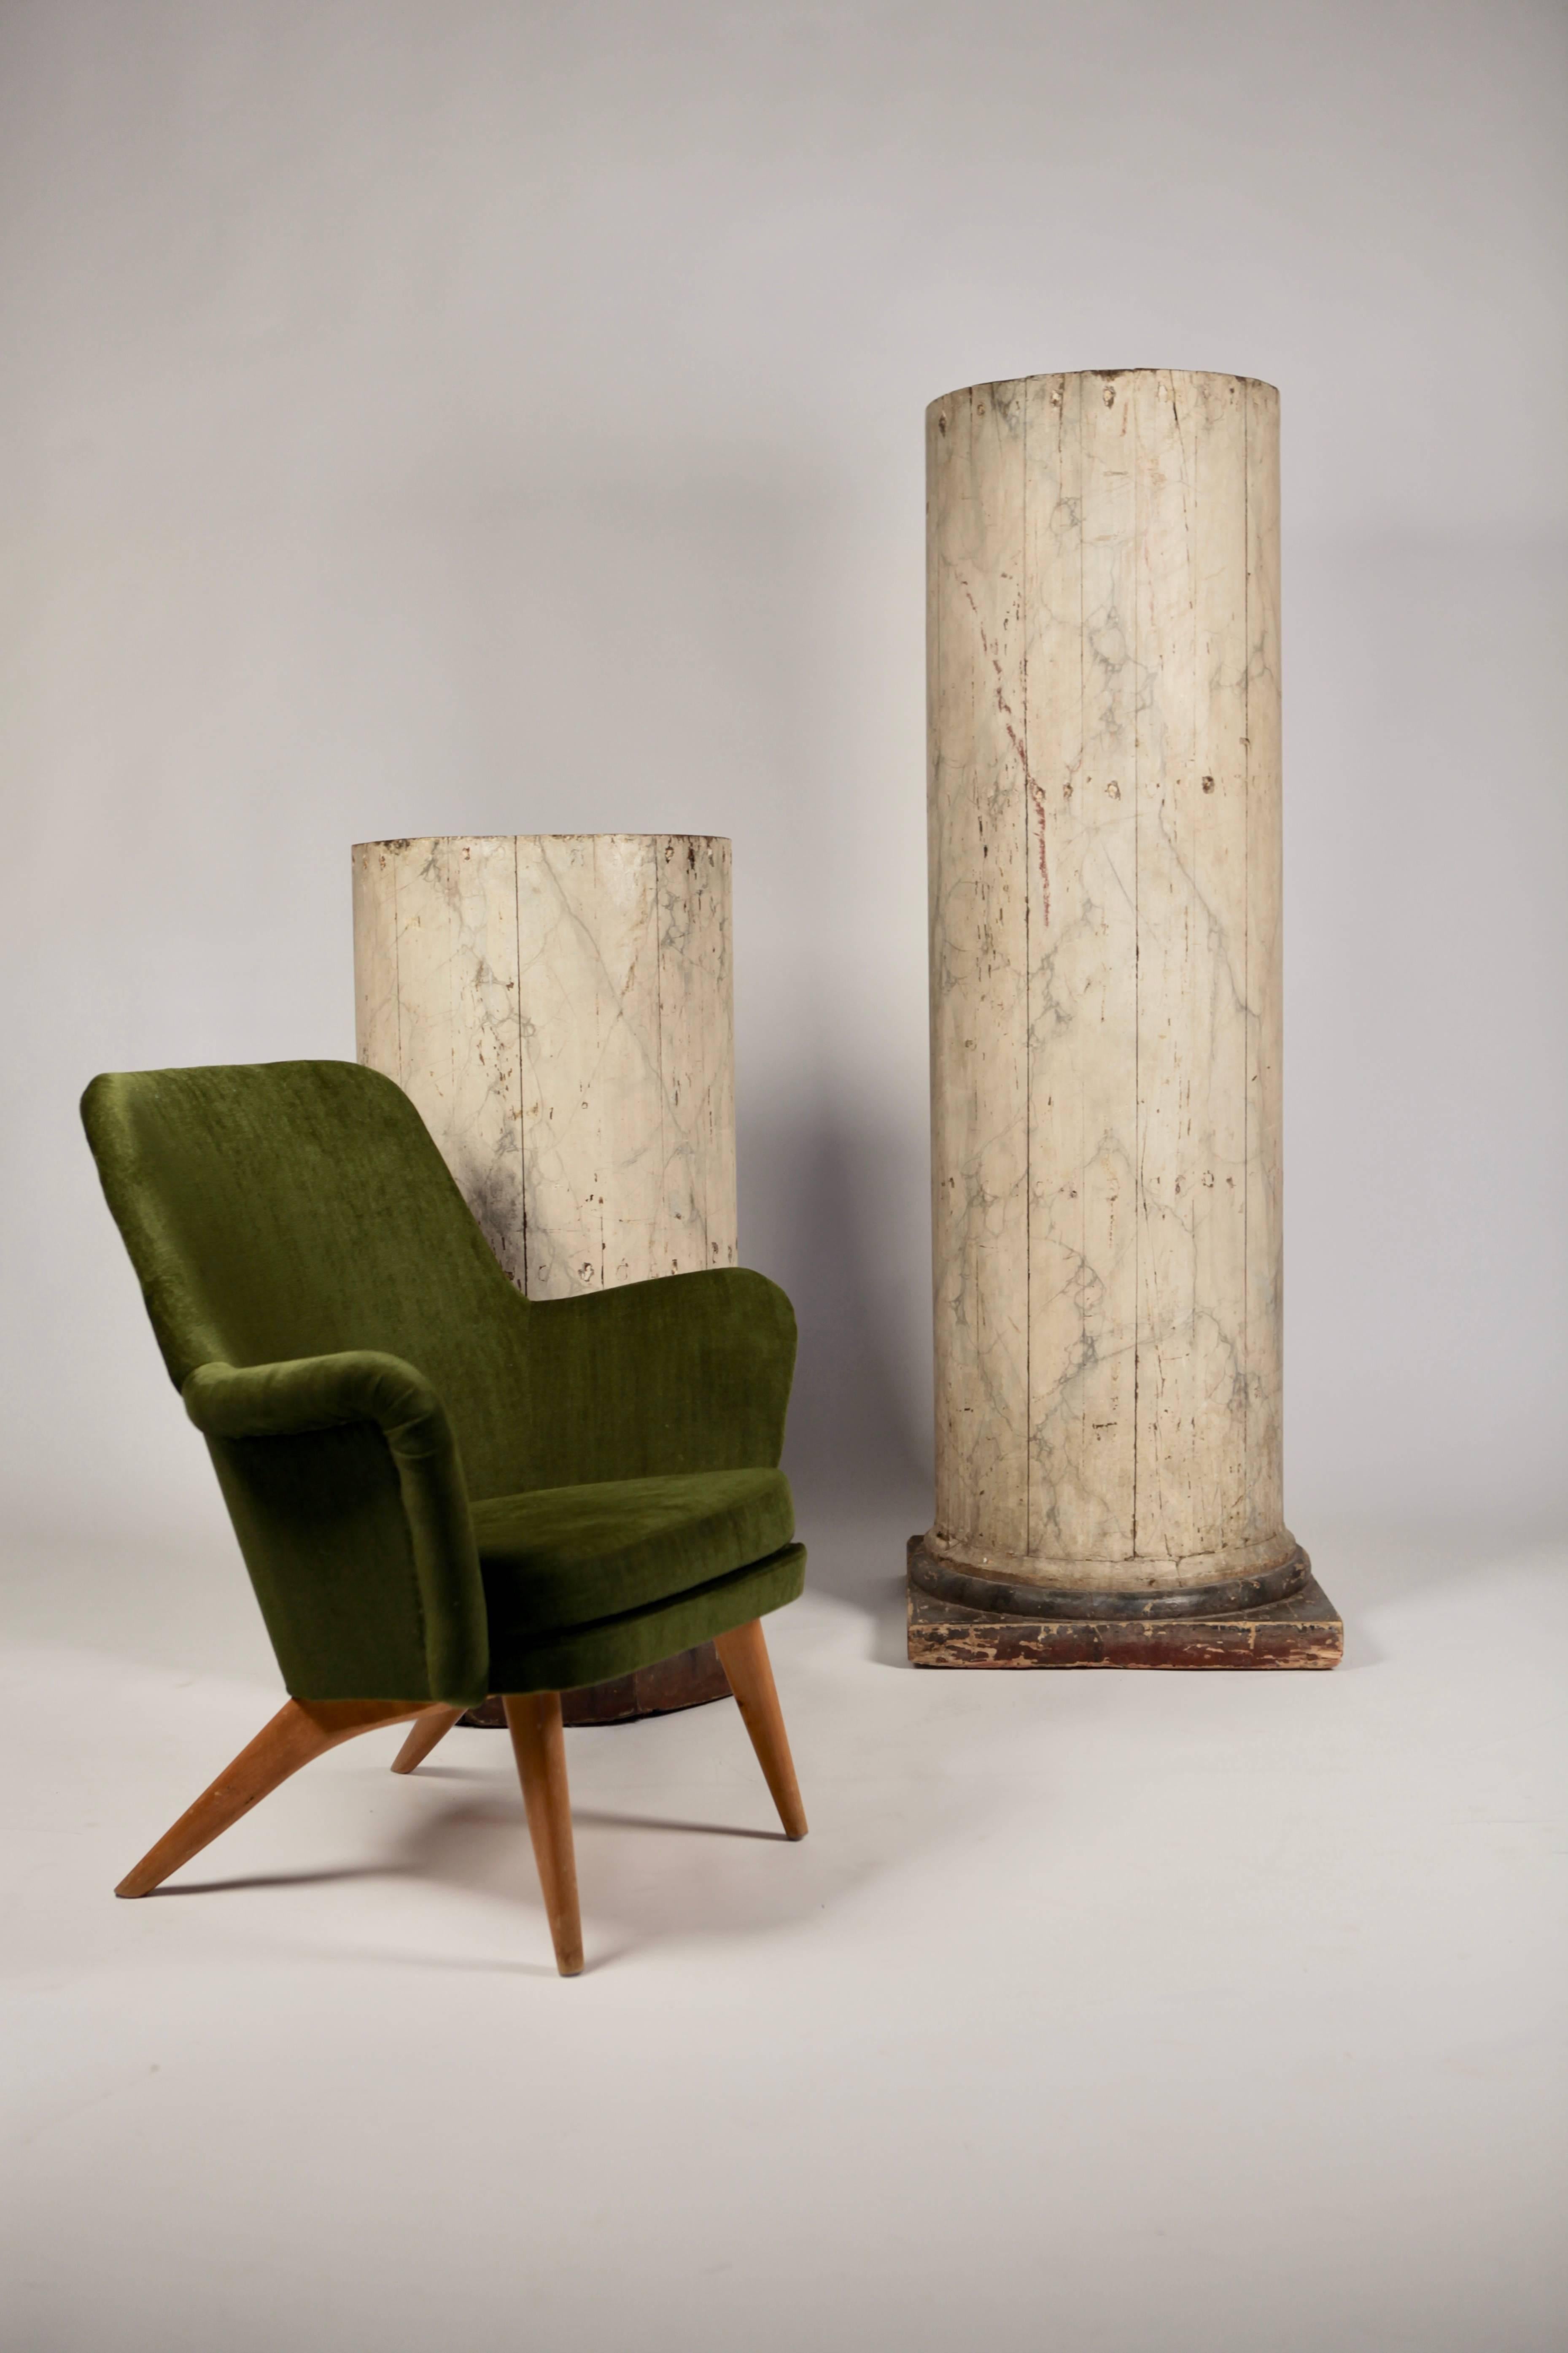 A pair of exceptional large North Italian wood columns
North-Italy early 19th century
Poli chrome marbled with great patina
Measures: The larger 60cm x 60cm base.50cm Ø, 171cm high
The smaller 55cm x 55cm base.50cm Ø, 110cm high.